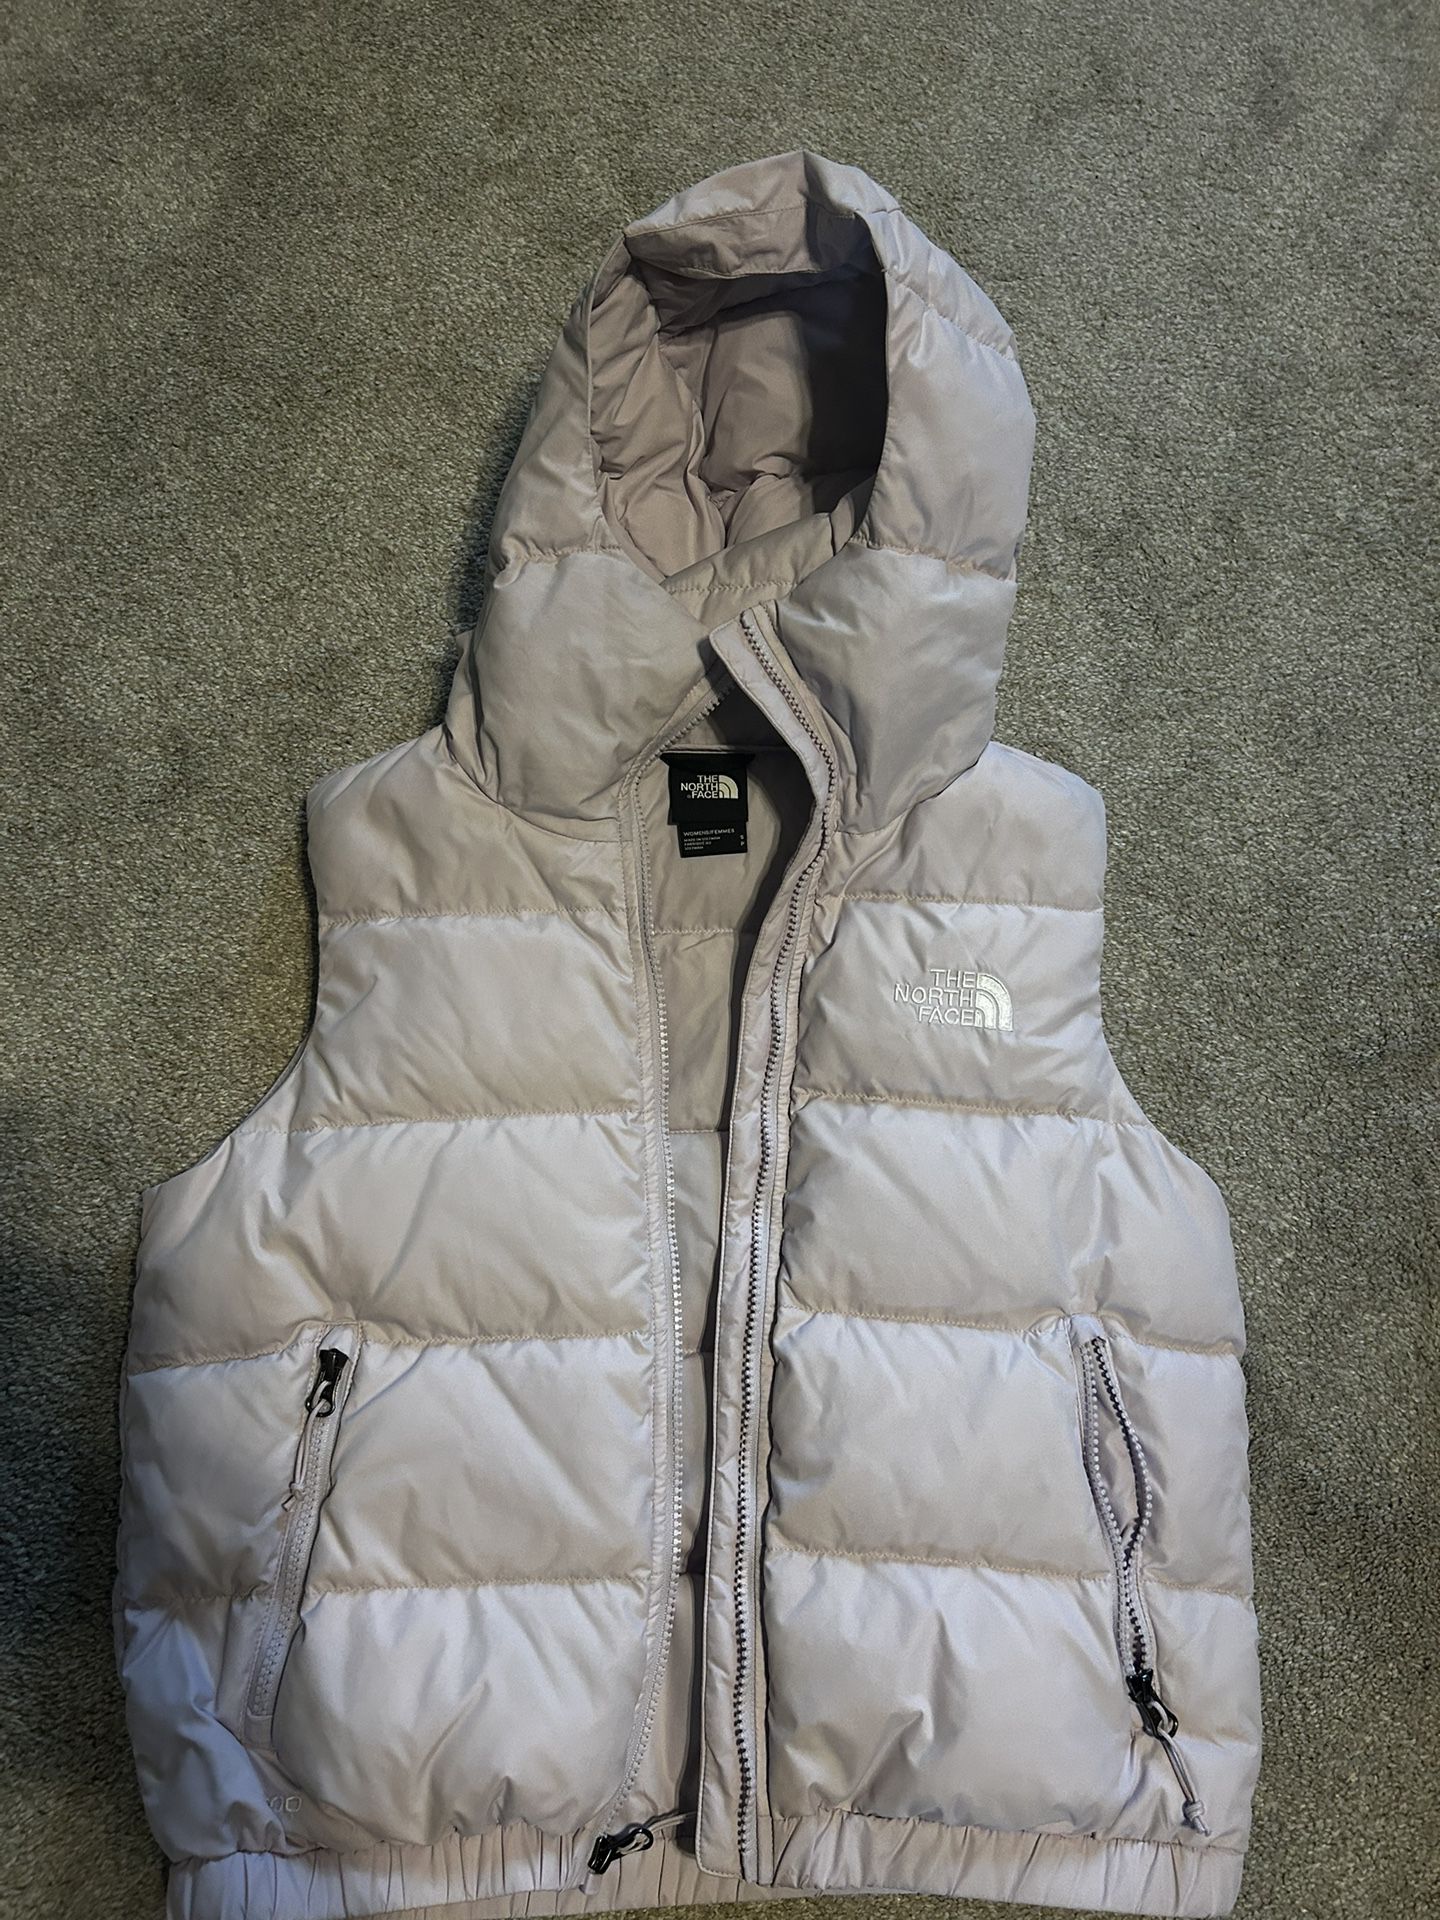 North face Puffer Vest